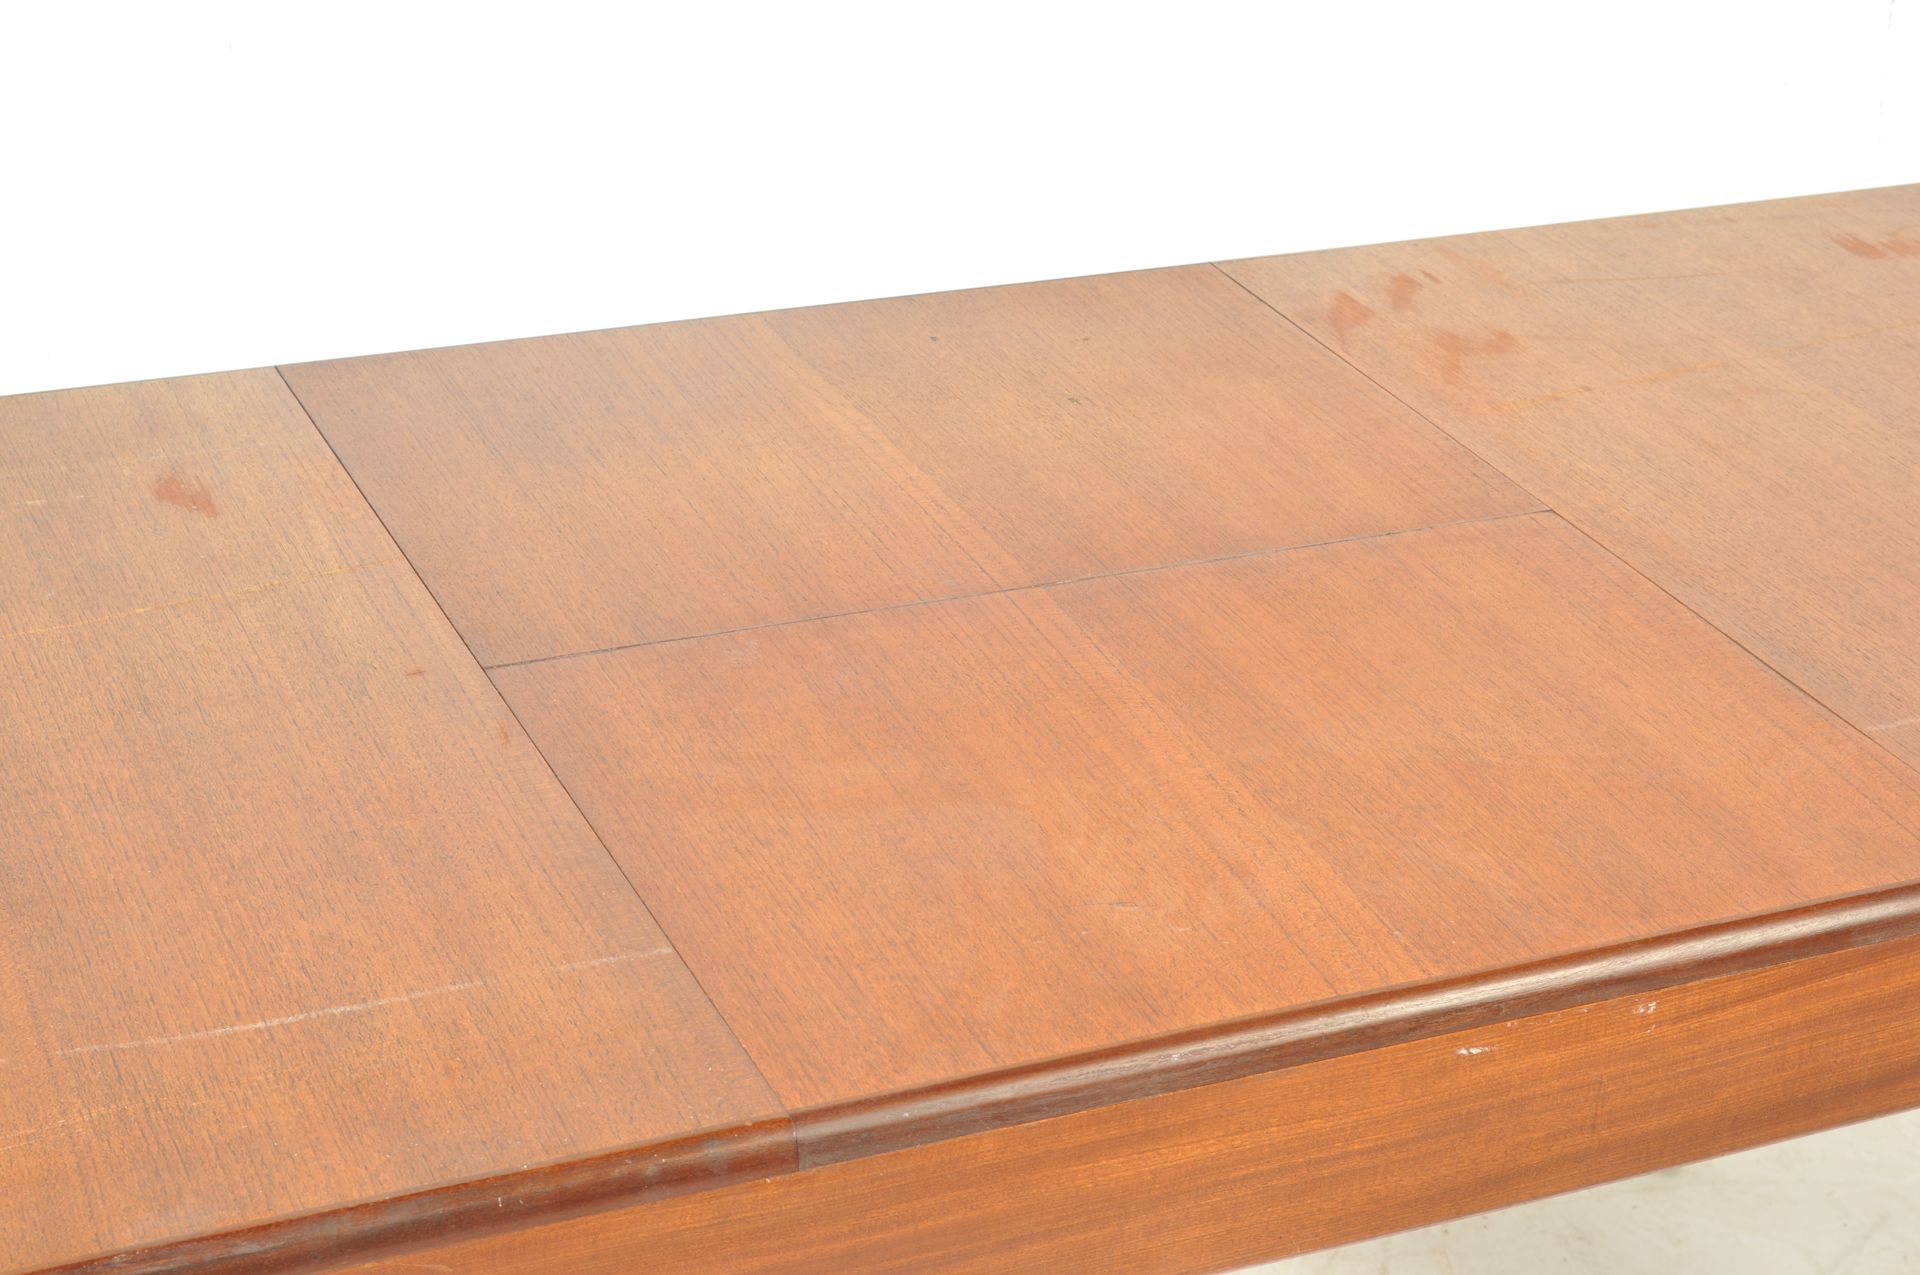 MID 20TH CENTURY TEAK WOOD EXTENDING DING TABLE - Image 7 of 7